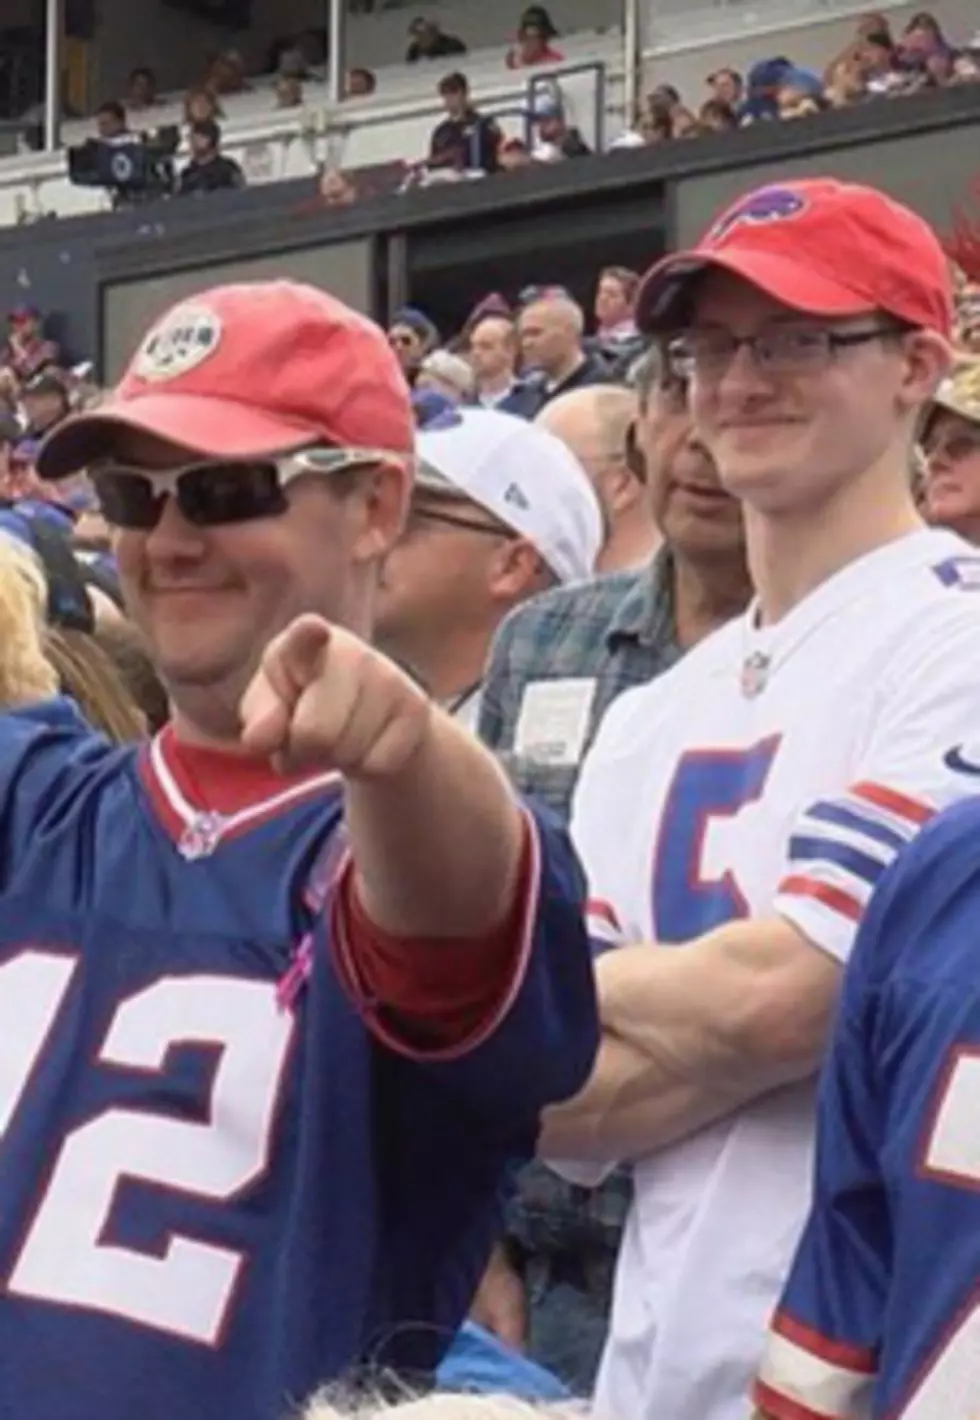 Guy At Buffalo Bills Game Holds Sign + Announces He Wants A Divorce [PICTURE]